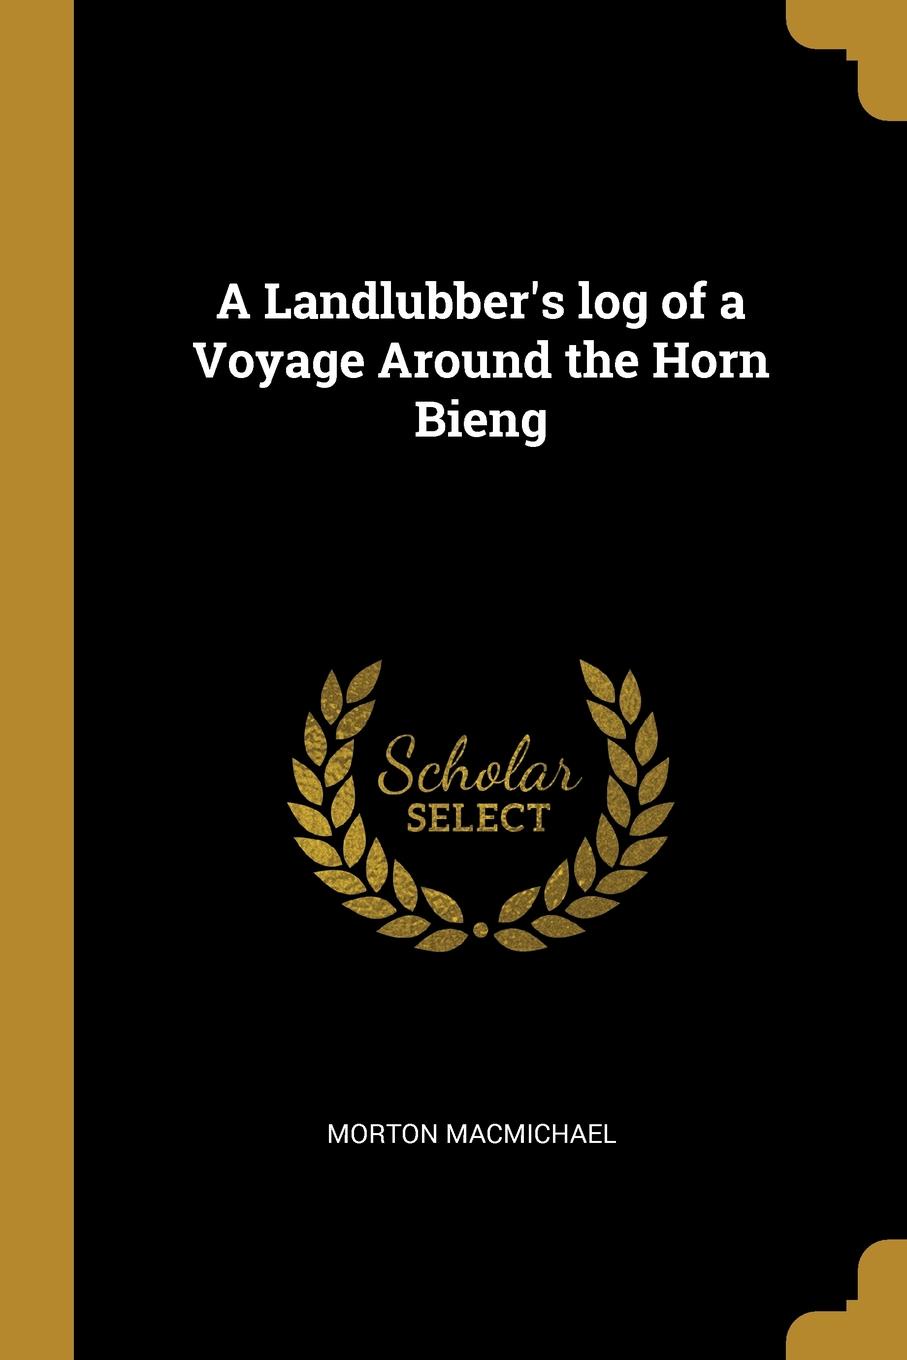 A Landlubber.s log of a Voyage Around the Horn Bieng